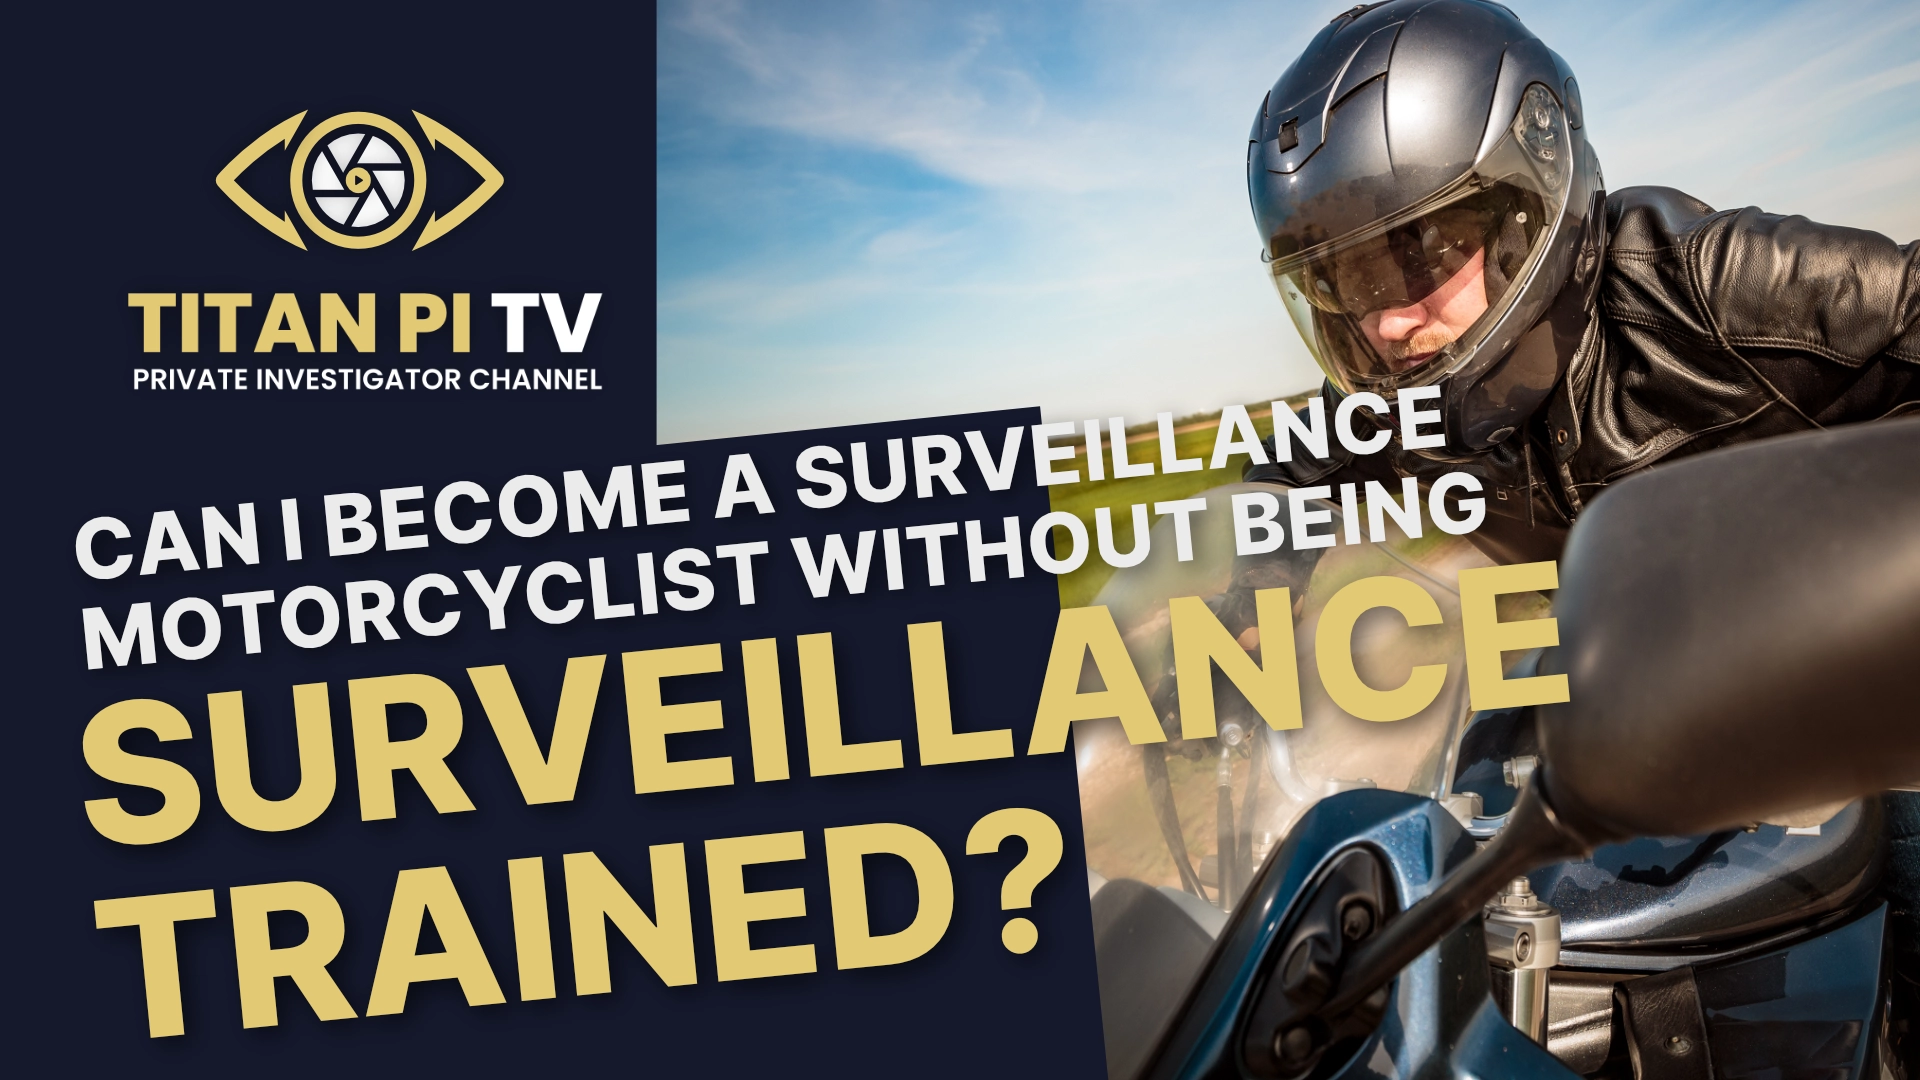 Can I become a surveillance motorcyclist without being surveillance trained first? | Titan PI TV